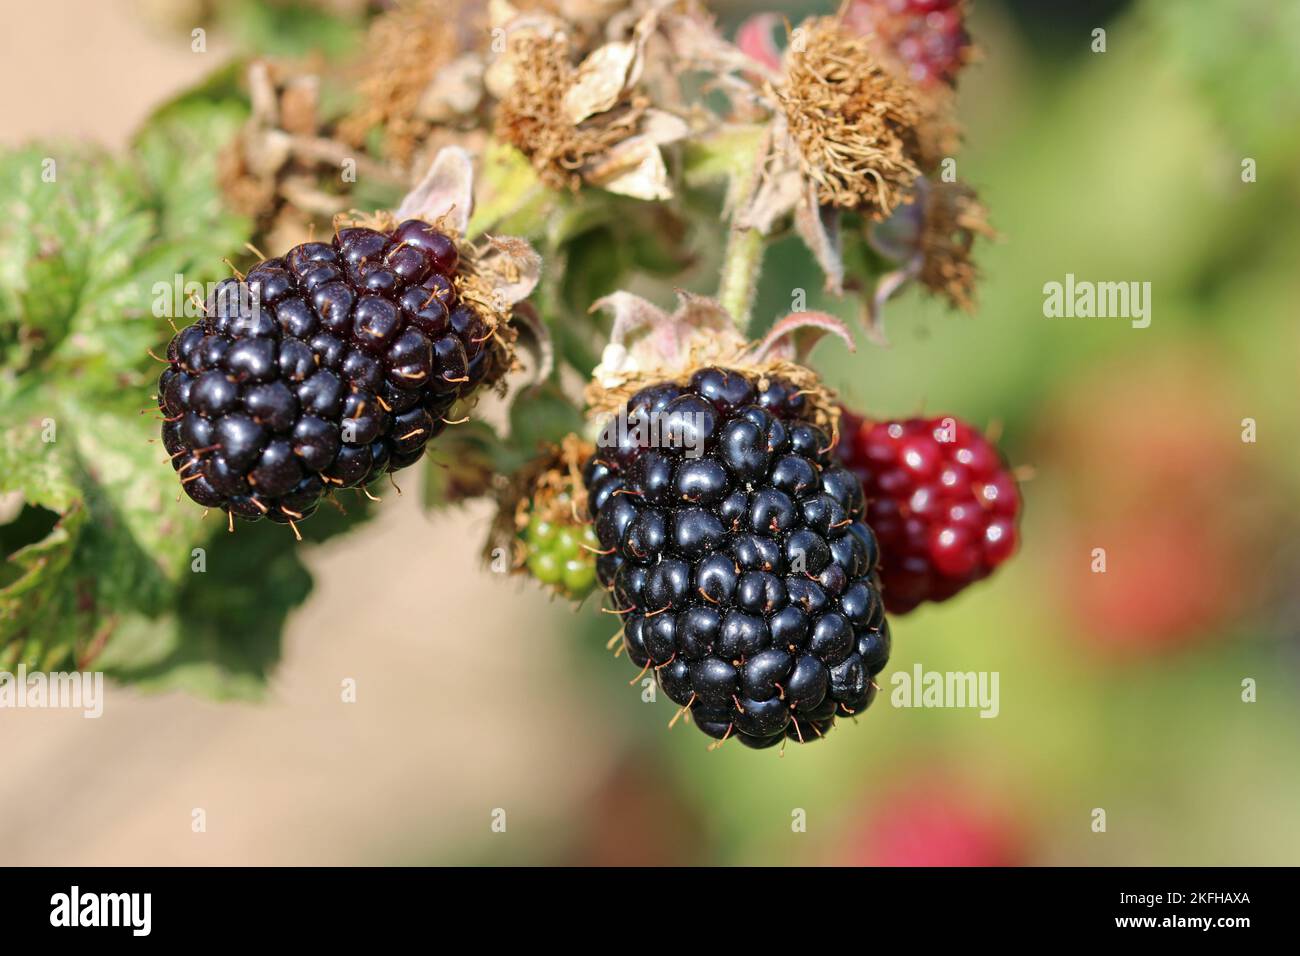 Cultivated ripe and unripe black and red blackberry, Rubus, fruits in close up, on the bush with a background of blurred leaves. Stock Photo